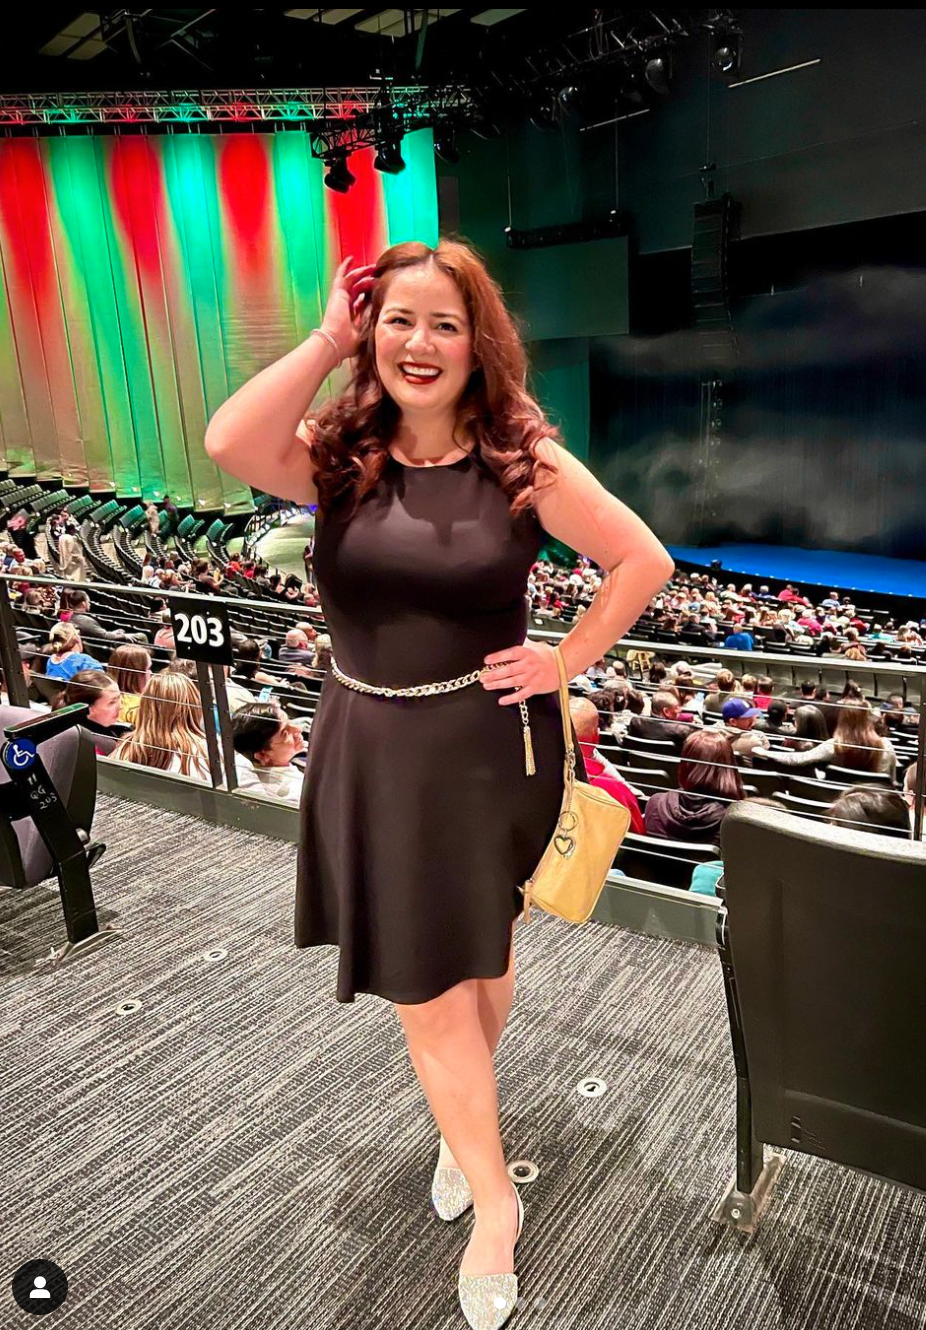 Emily smiles as she poses for a photo a theater while wearing a knee-length sheath dress with a chain belt and sequined flats